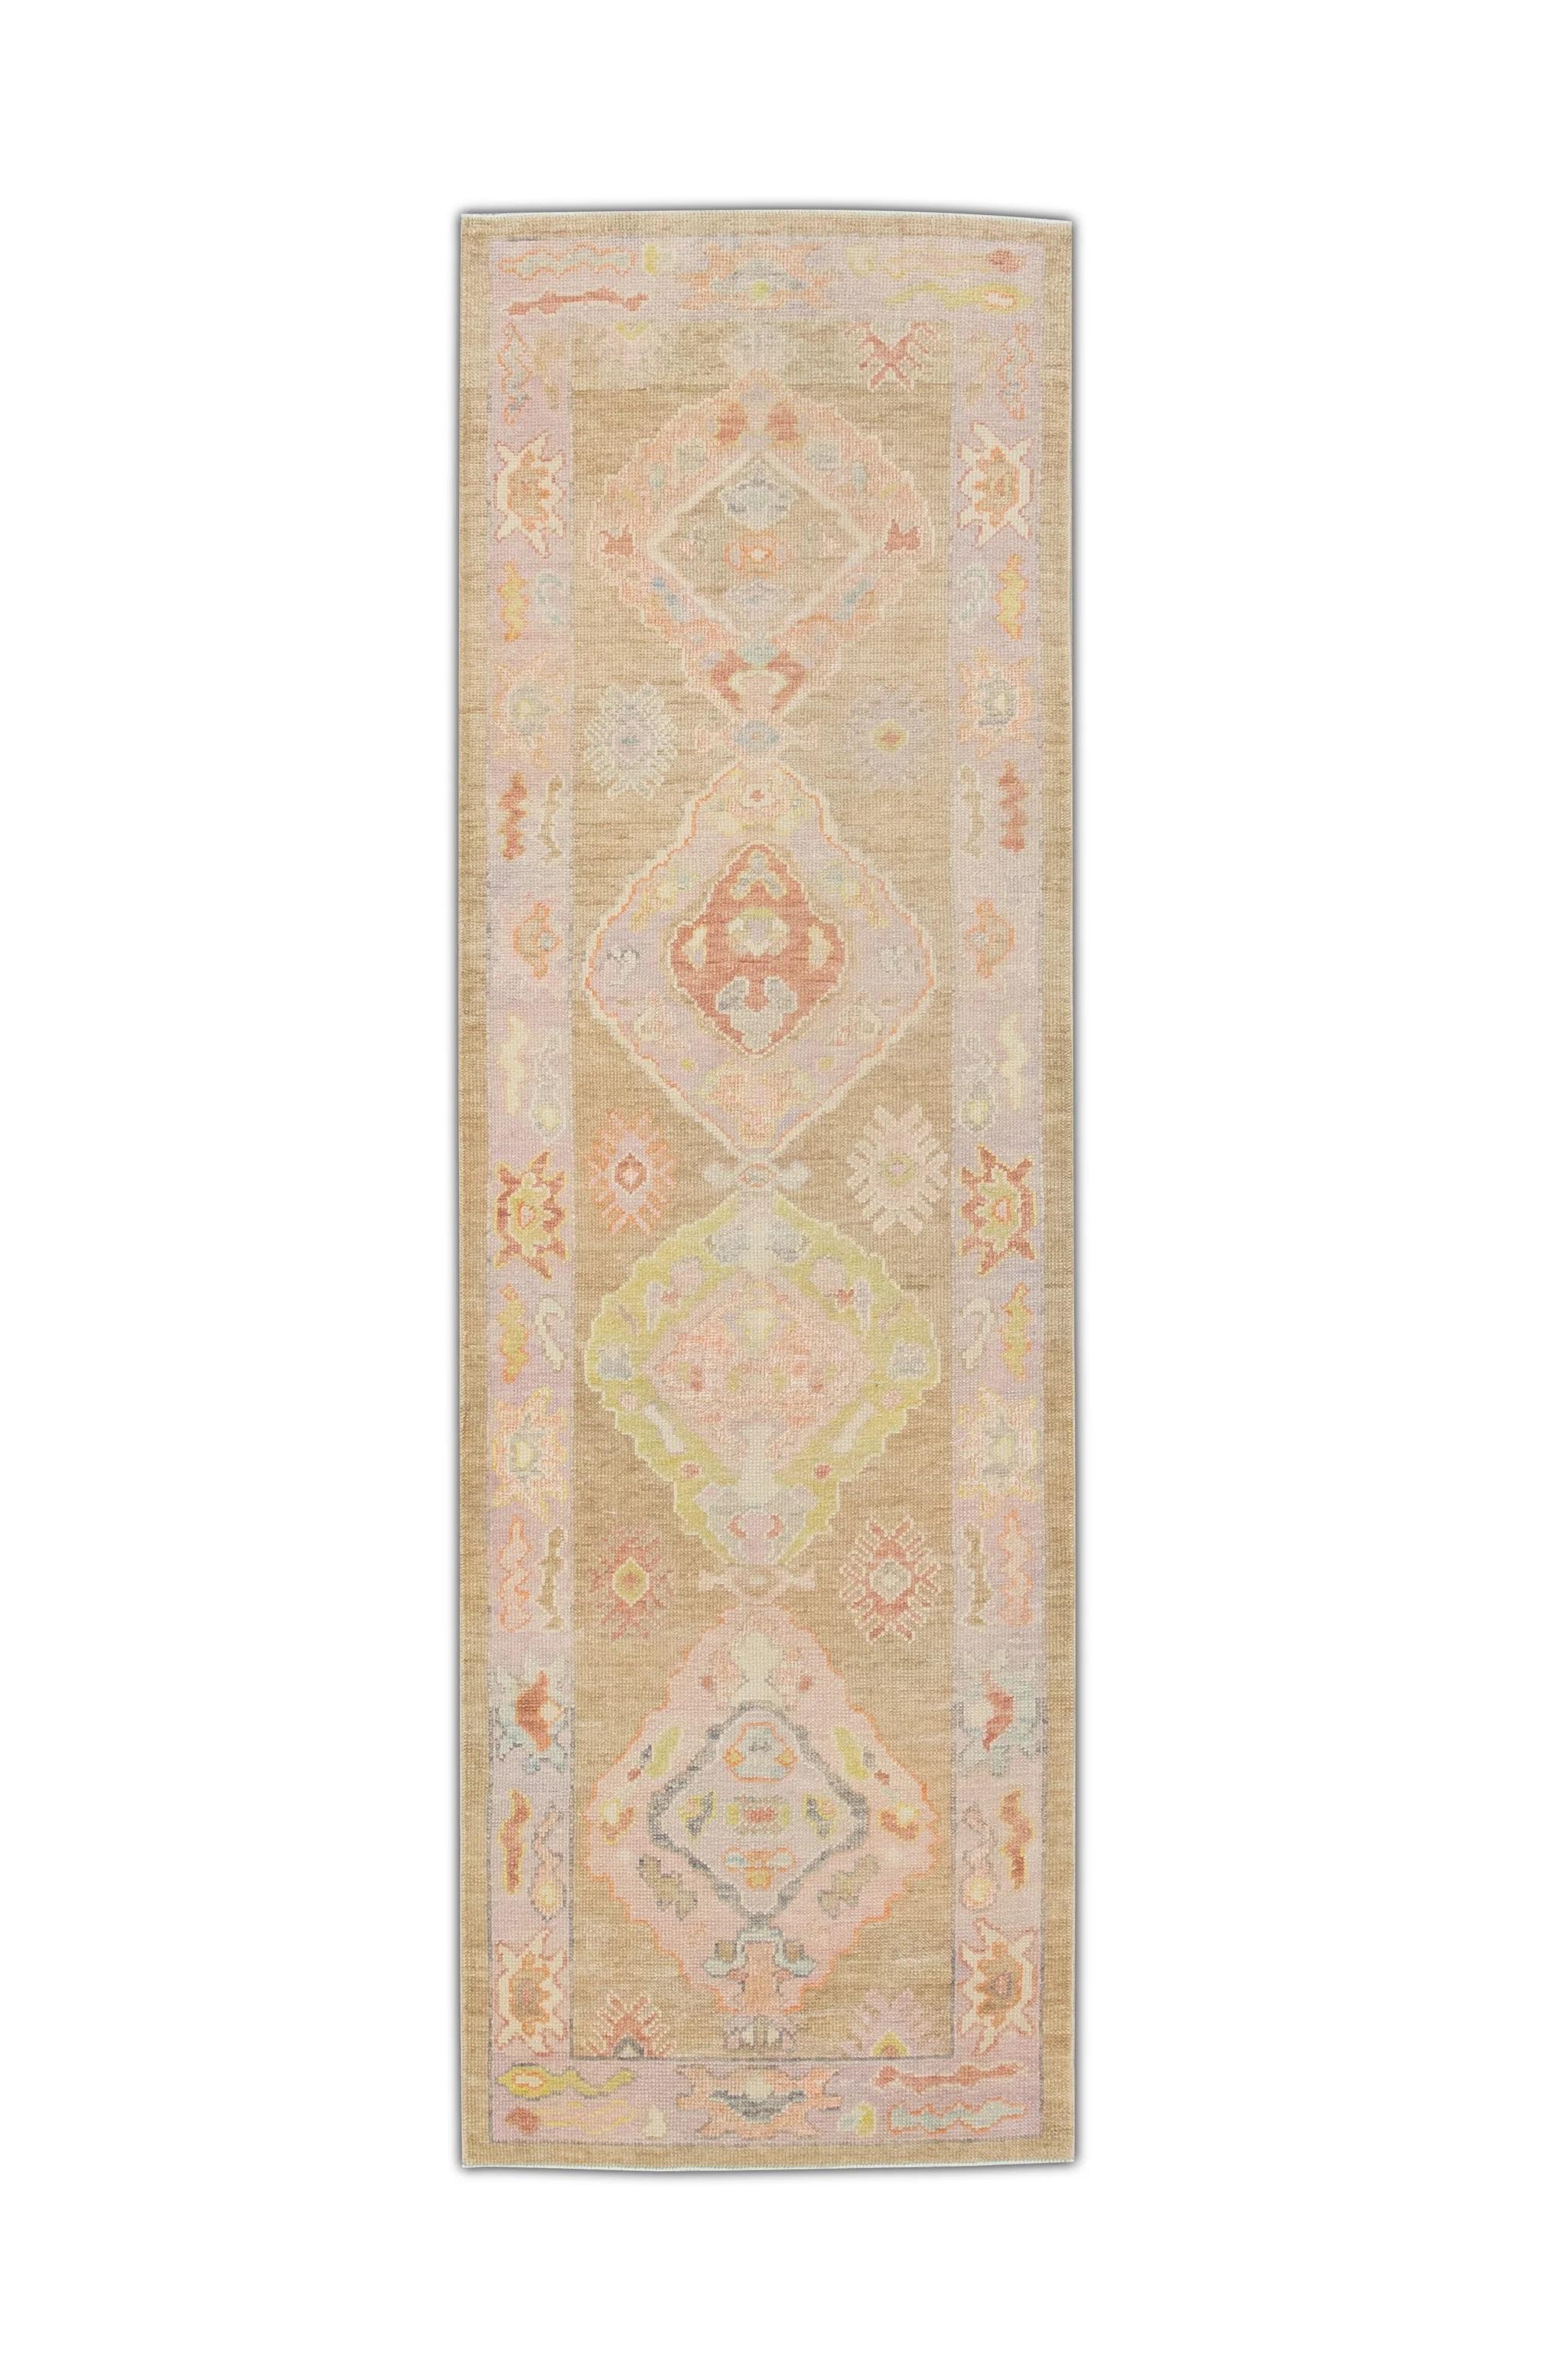 Colorful Handwoven Wool Turkish Oushak Rug with Pink Floral Design 3' x 9'6